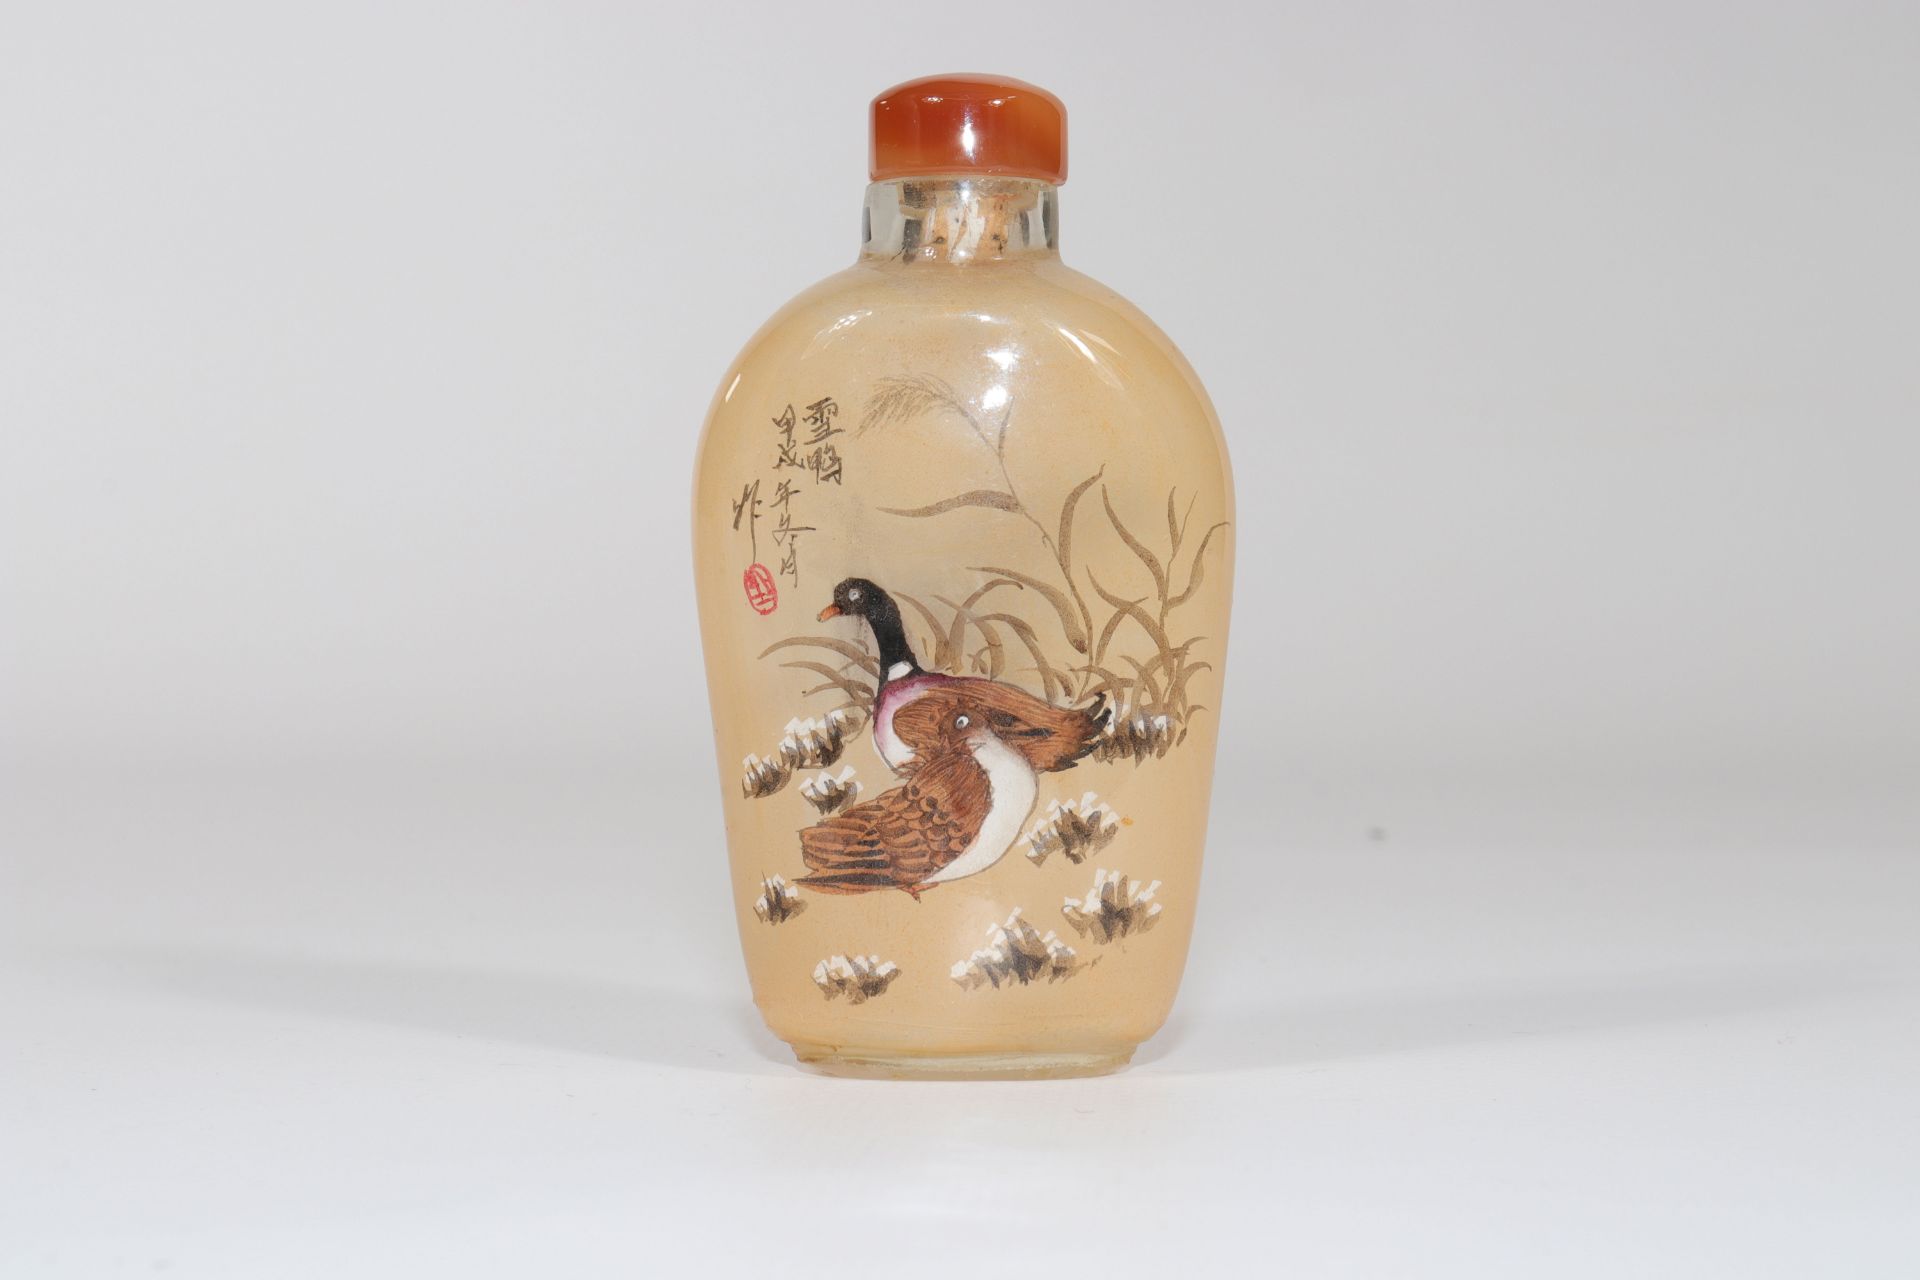 China painted glass snuffbox with geese decor - Image 2 of 2